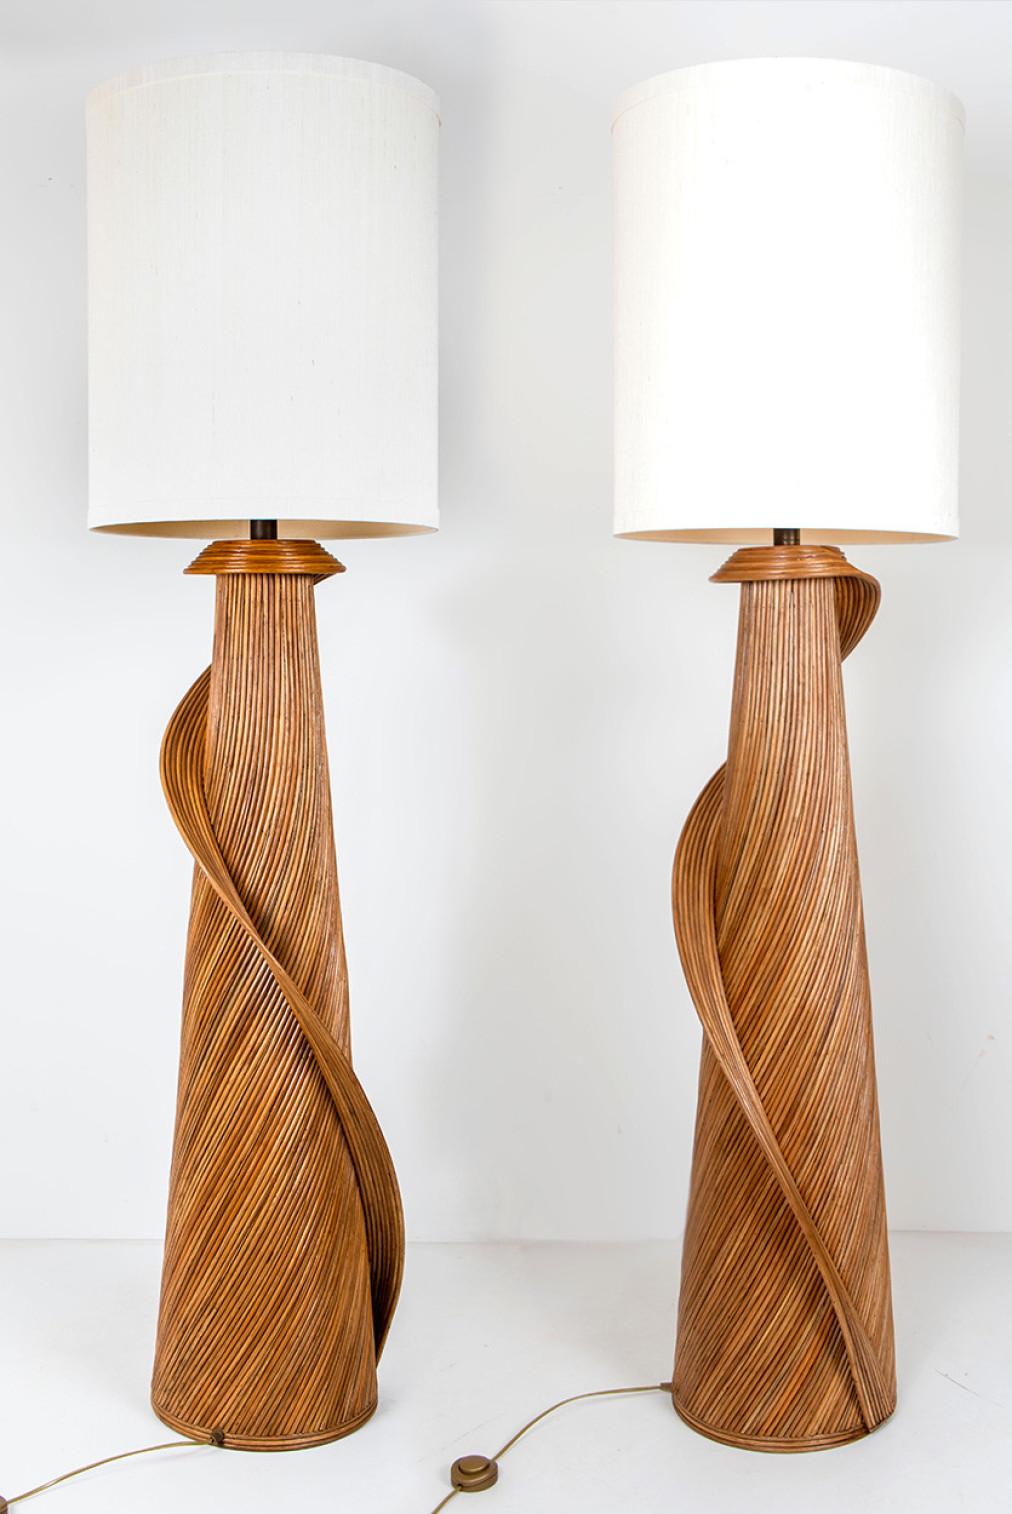 Exceptional XL Rattan structured floor lamps, designed by the Dutch artist René Houben.

The contemporary sculptural rattan Lamp-foot is topped by a lampshade made of handwoven linen.

A real piece of art. Bohemian chic design and trendy